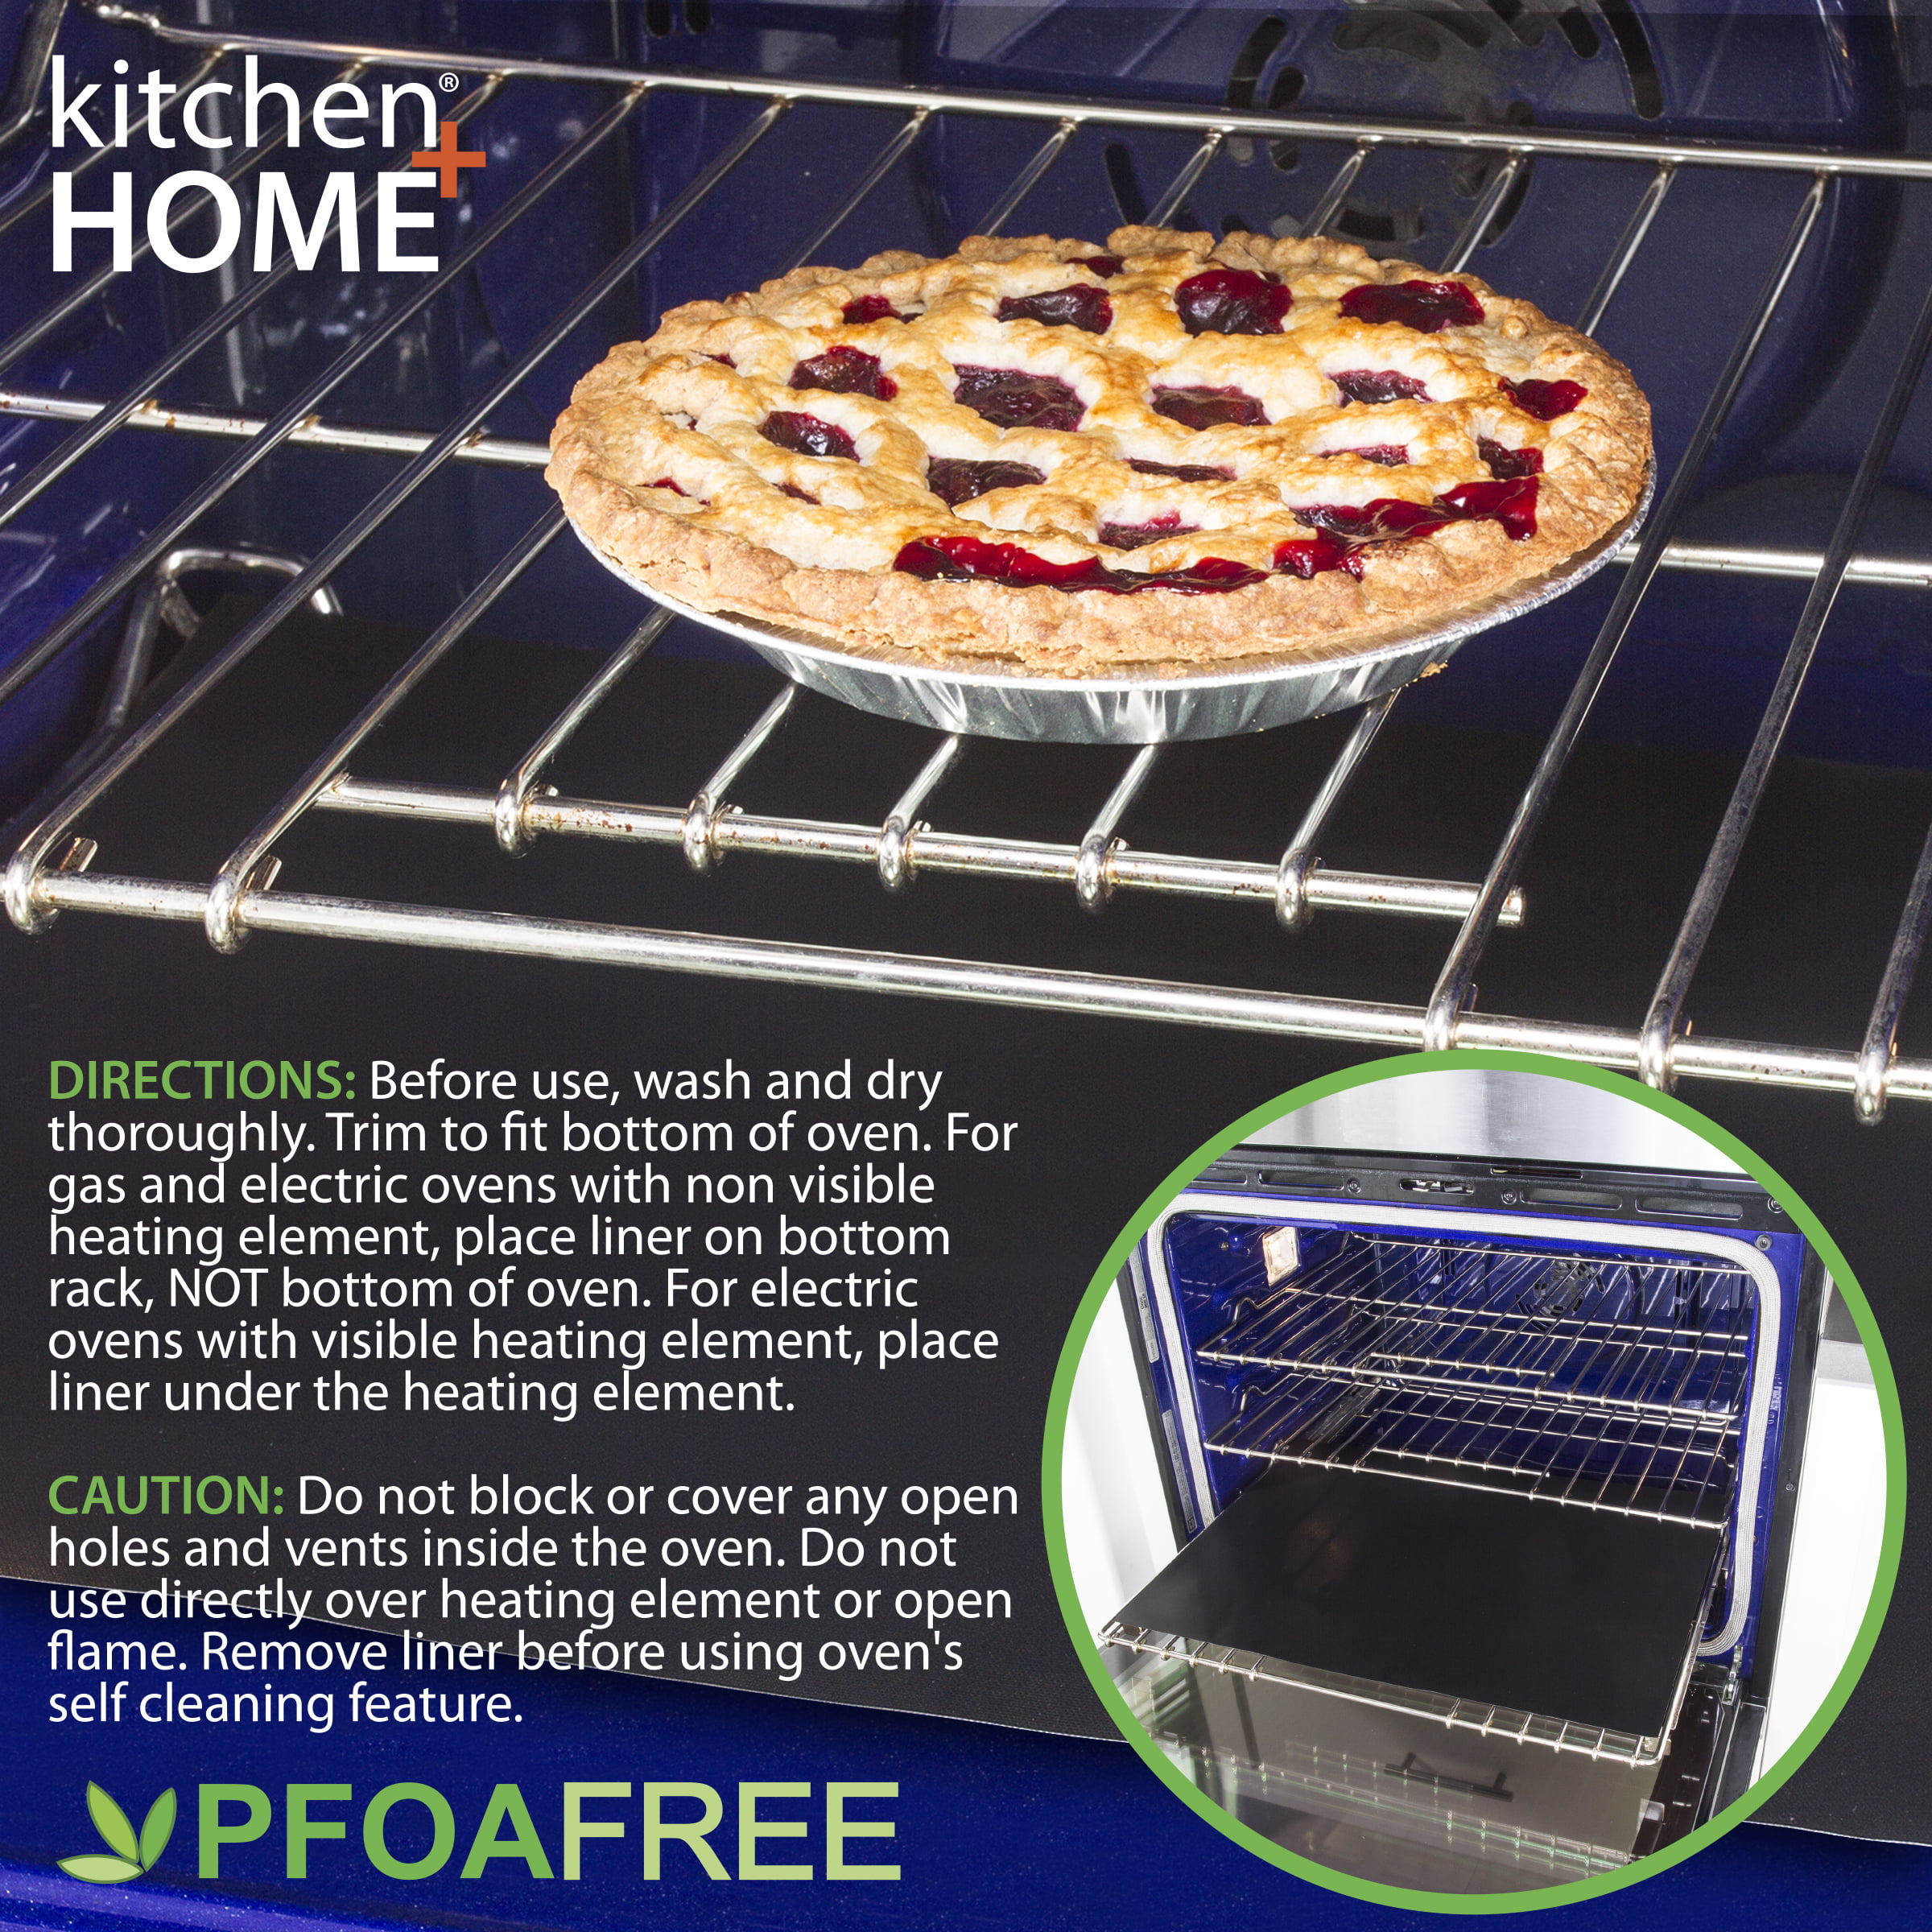 2 Gas Microwave and Toaster Ovens 5PC BPA Free Non-Stick Oven Liners or Pan Liners- Heavy Duty Use for Electric Diadia Large Oven Liner 